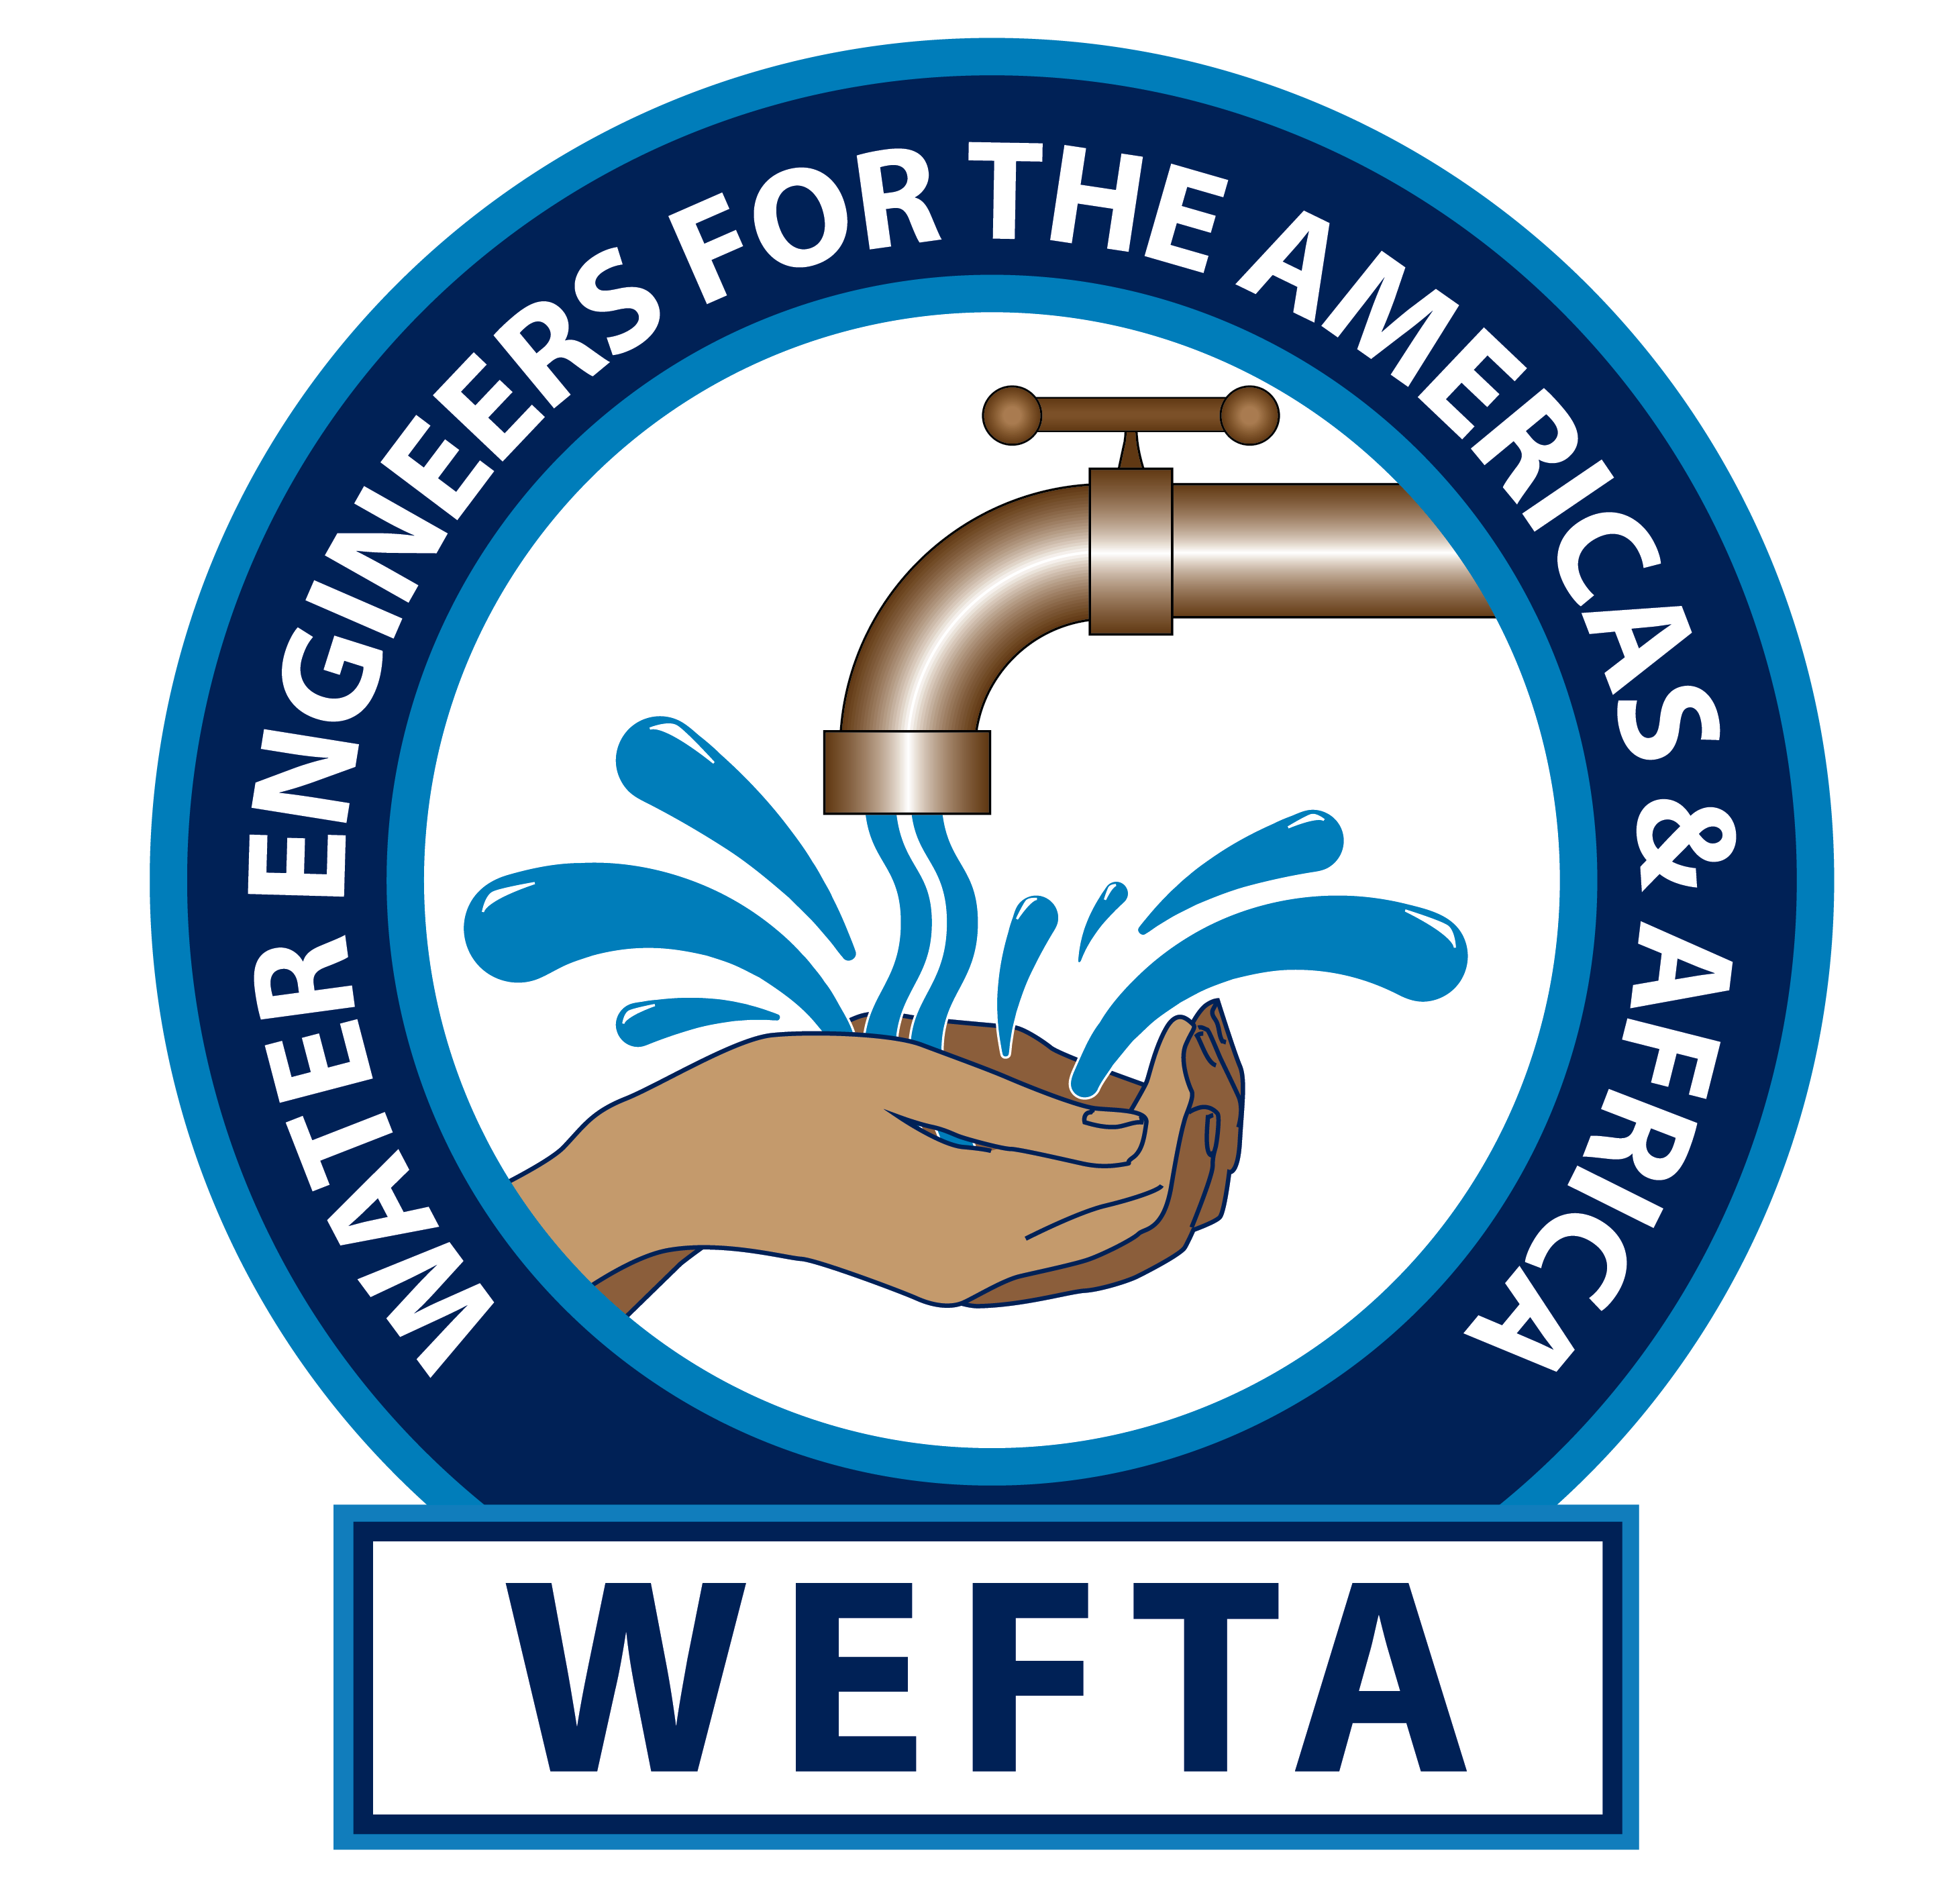 Water Engineers for the Americas & Africa